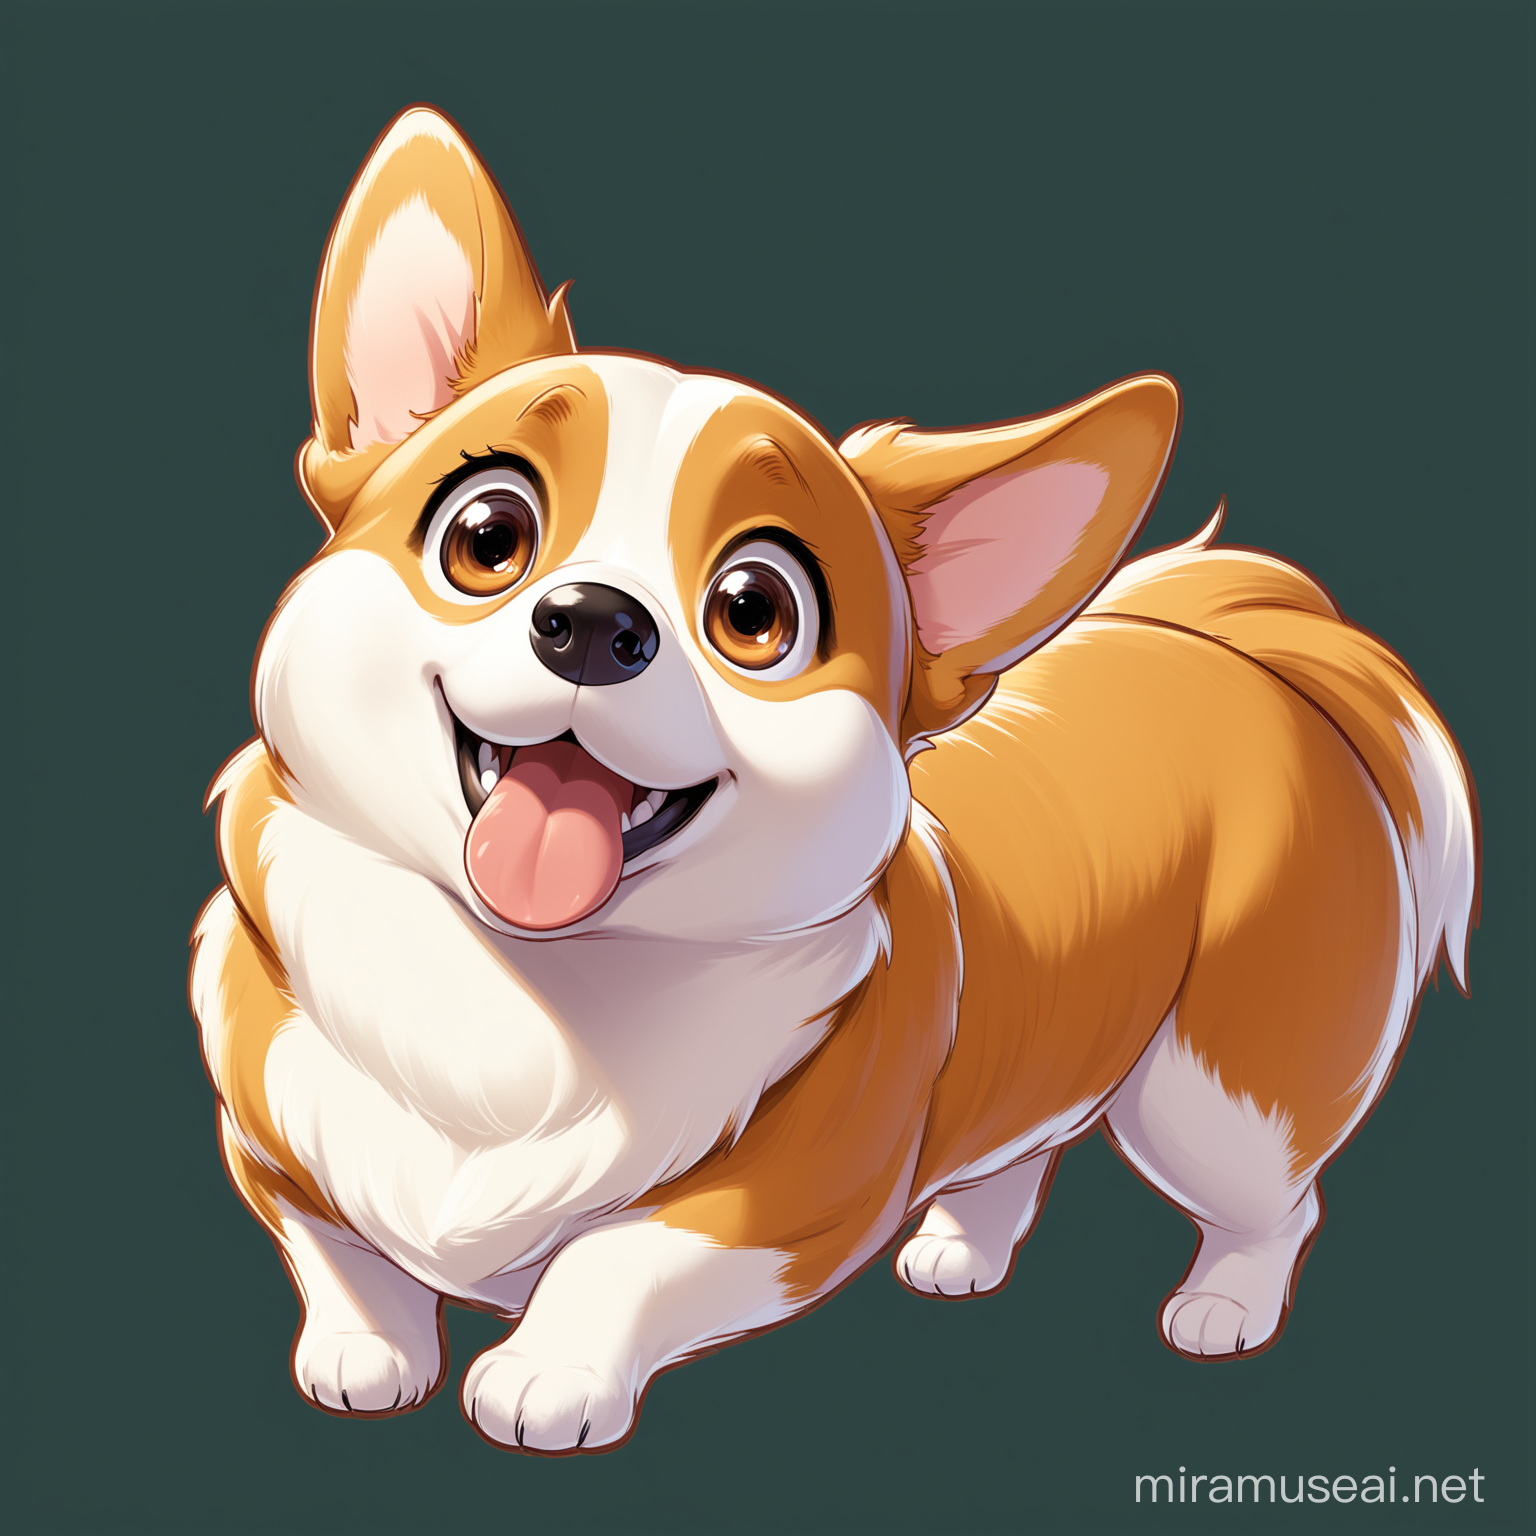 disney pixar cartoon smiling surprised Pembroke Welsh Corgi with large head and large surprised round eyes and round mouth wide open, no tail, transparent background